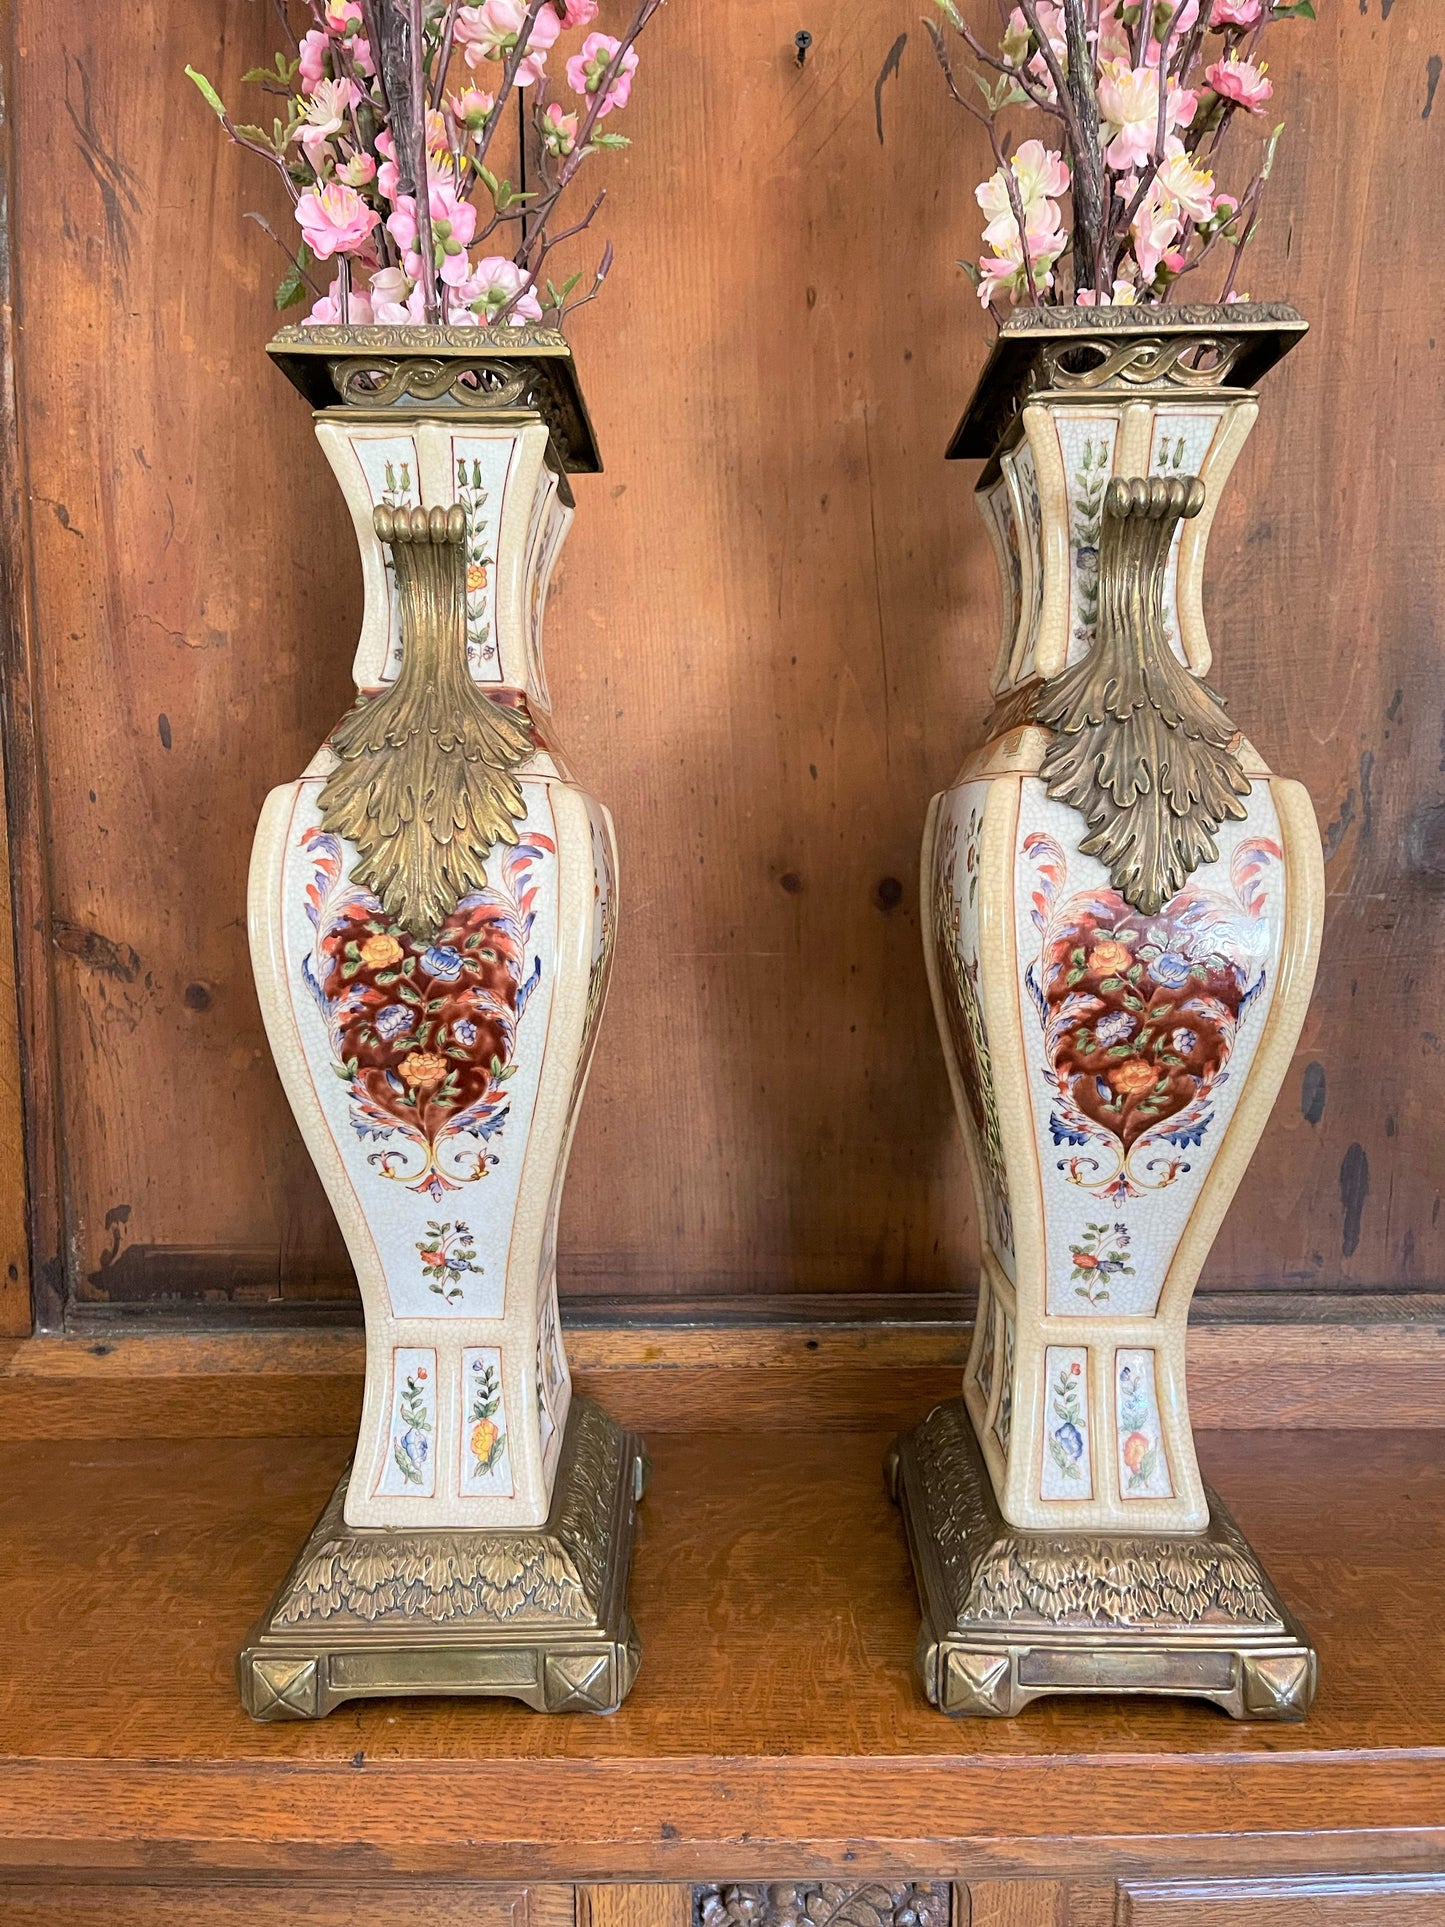 Ormolu Catillian Urns, Sold as a Pair, Stately Mantle Table Shelf Decor, Heavy